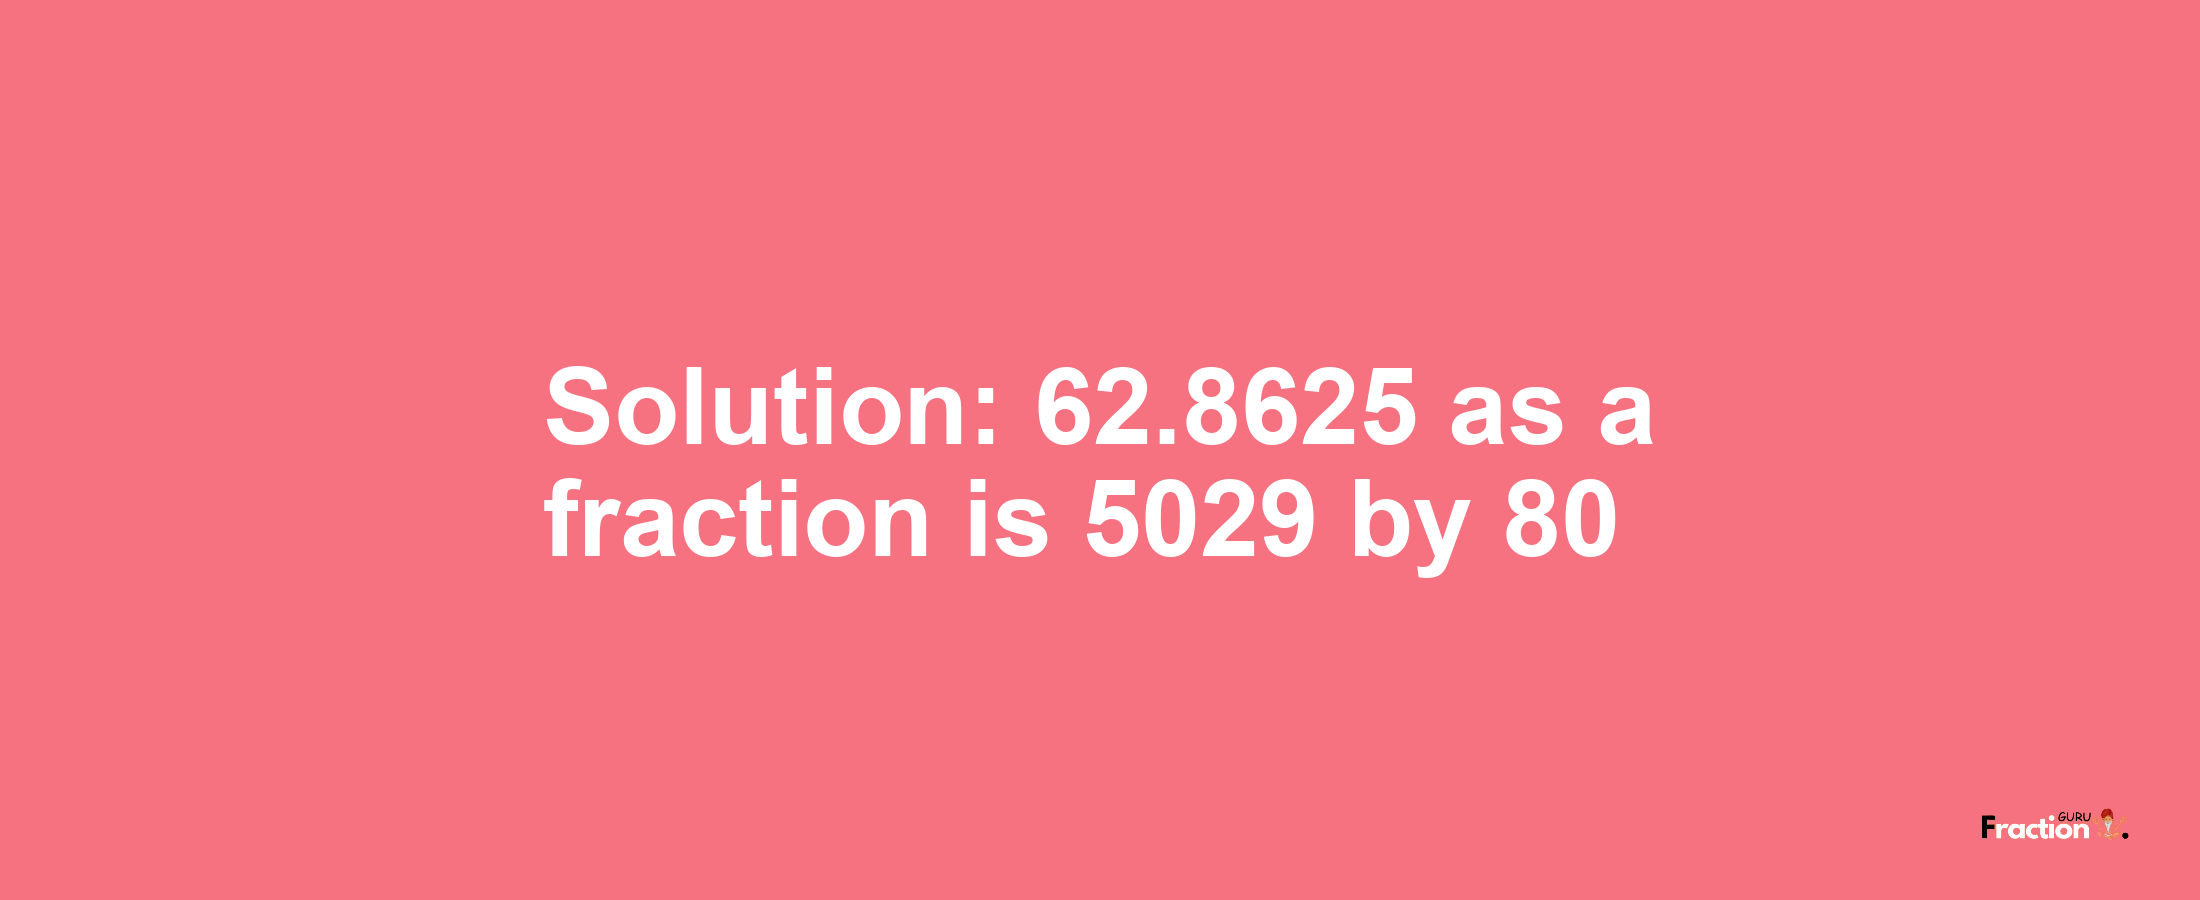 Solution:62.8625 as a fraction is 5029/80